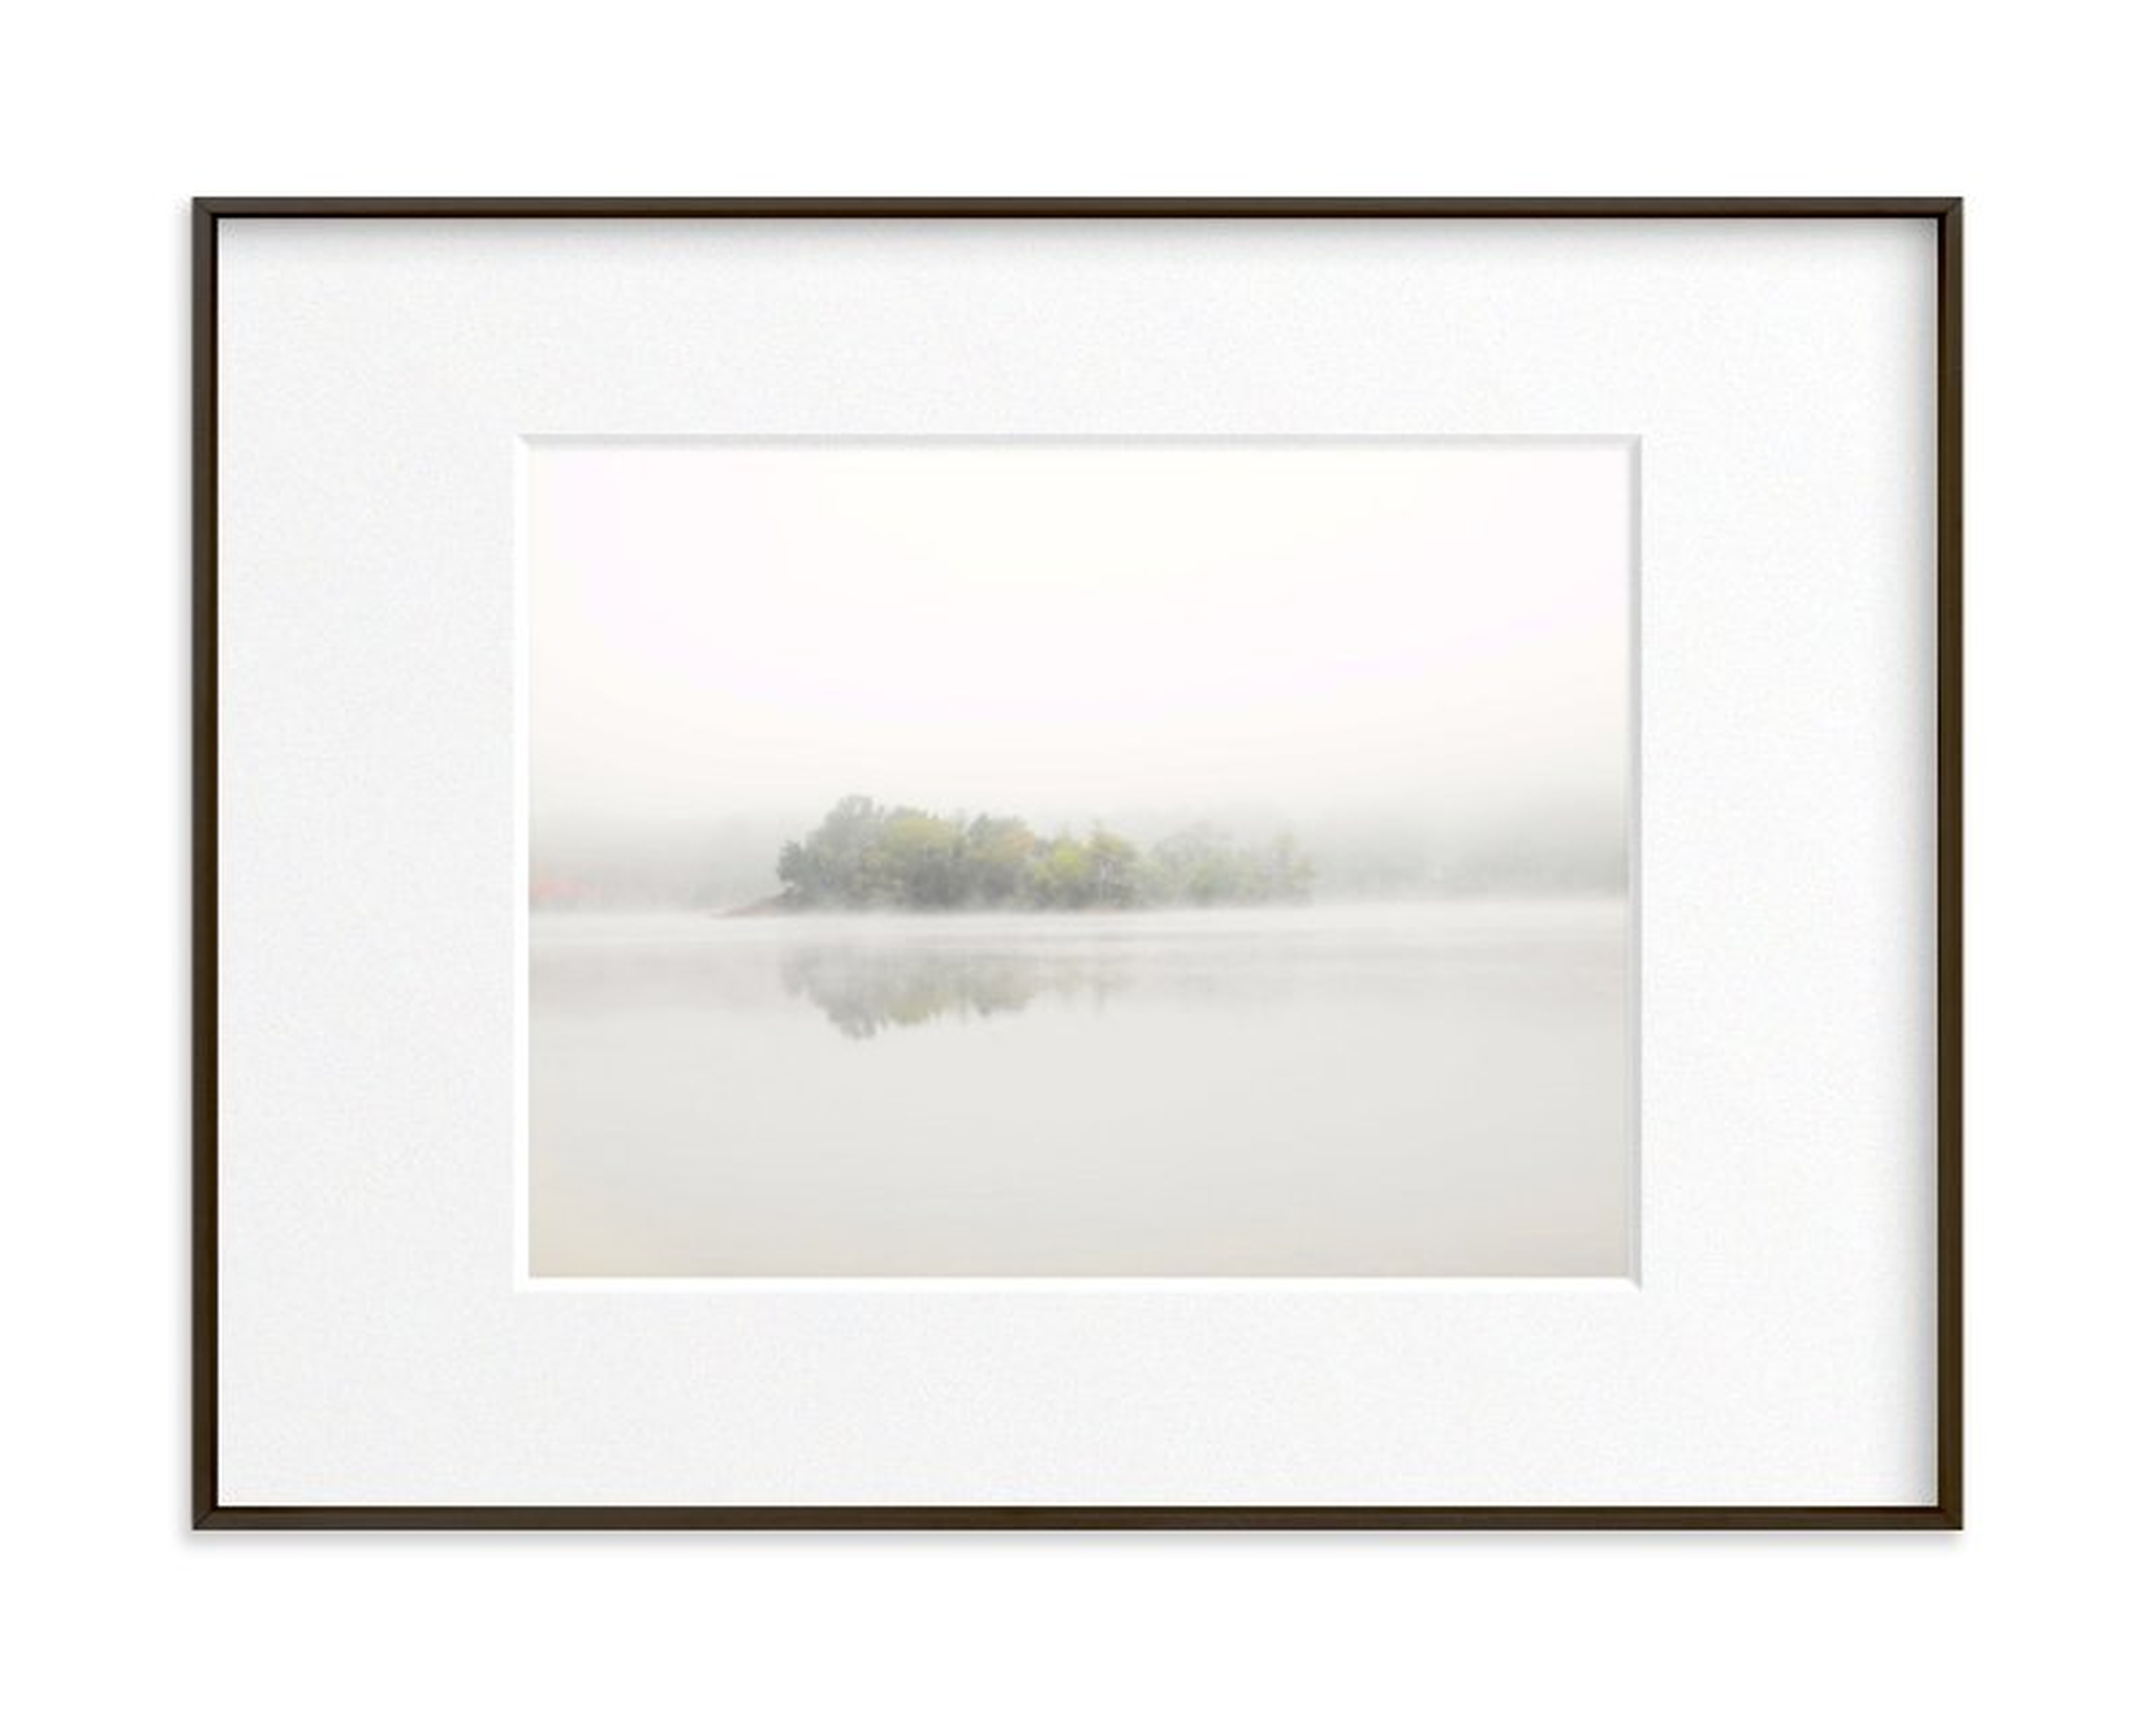 The Island - 24 x 18 - Matte Black Frame - Matted - Minted